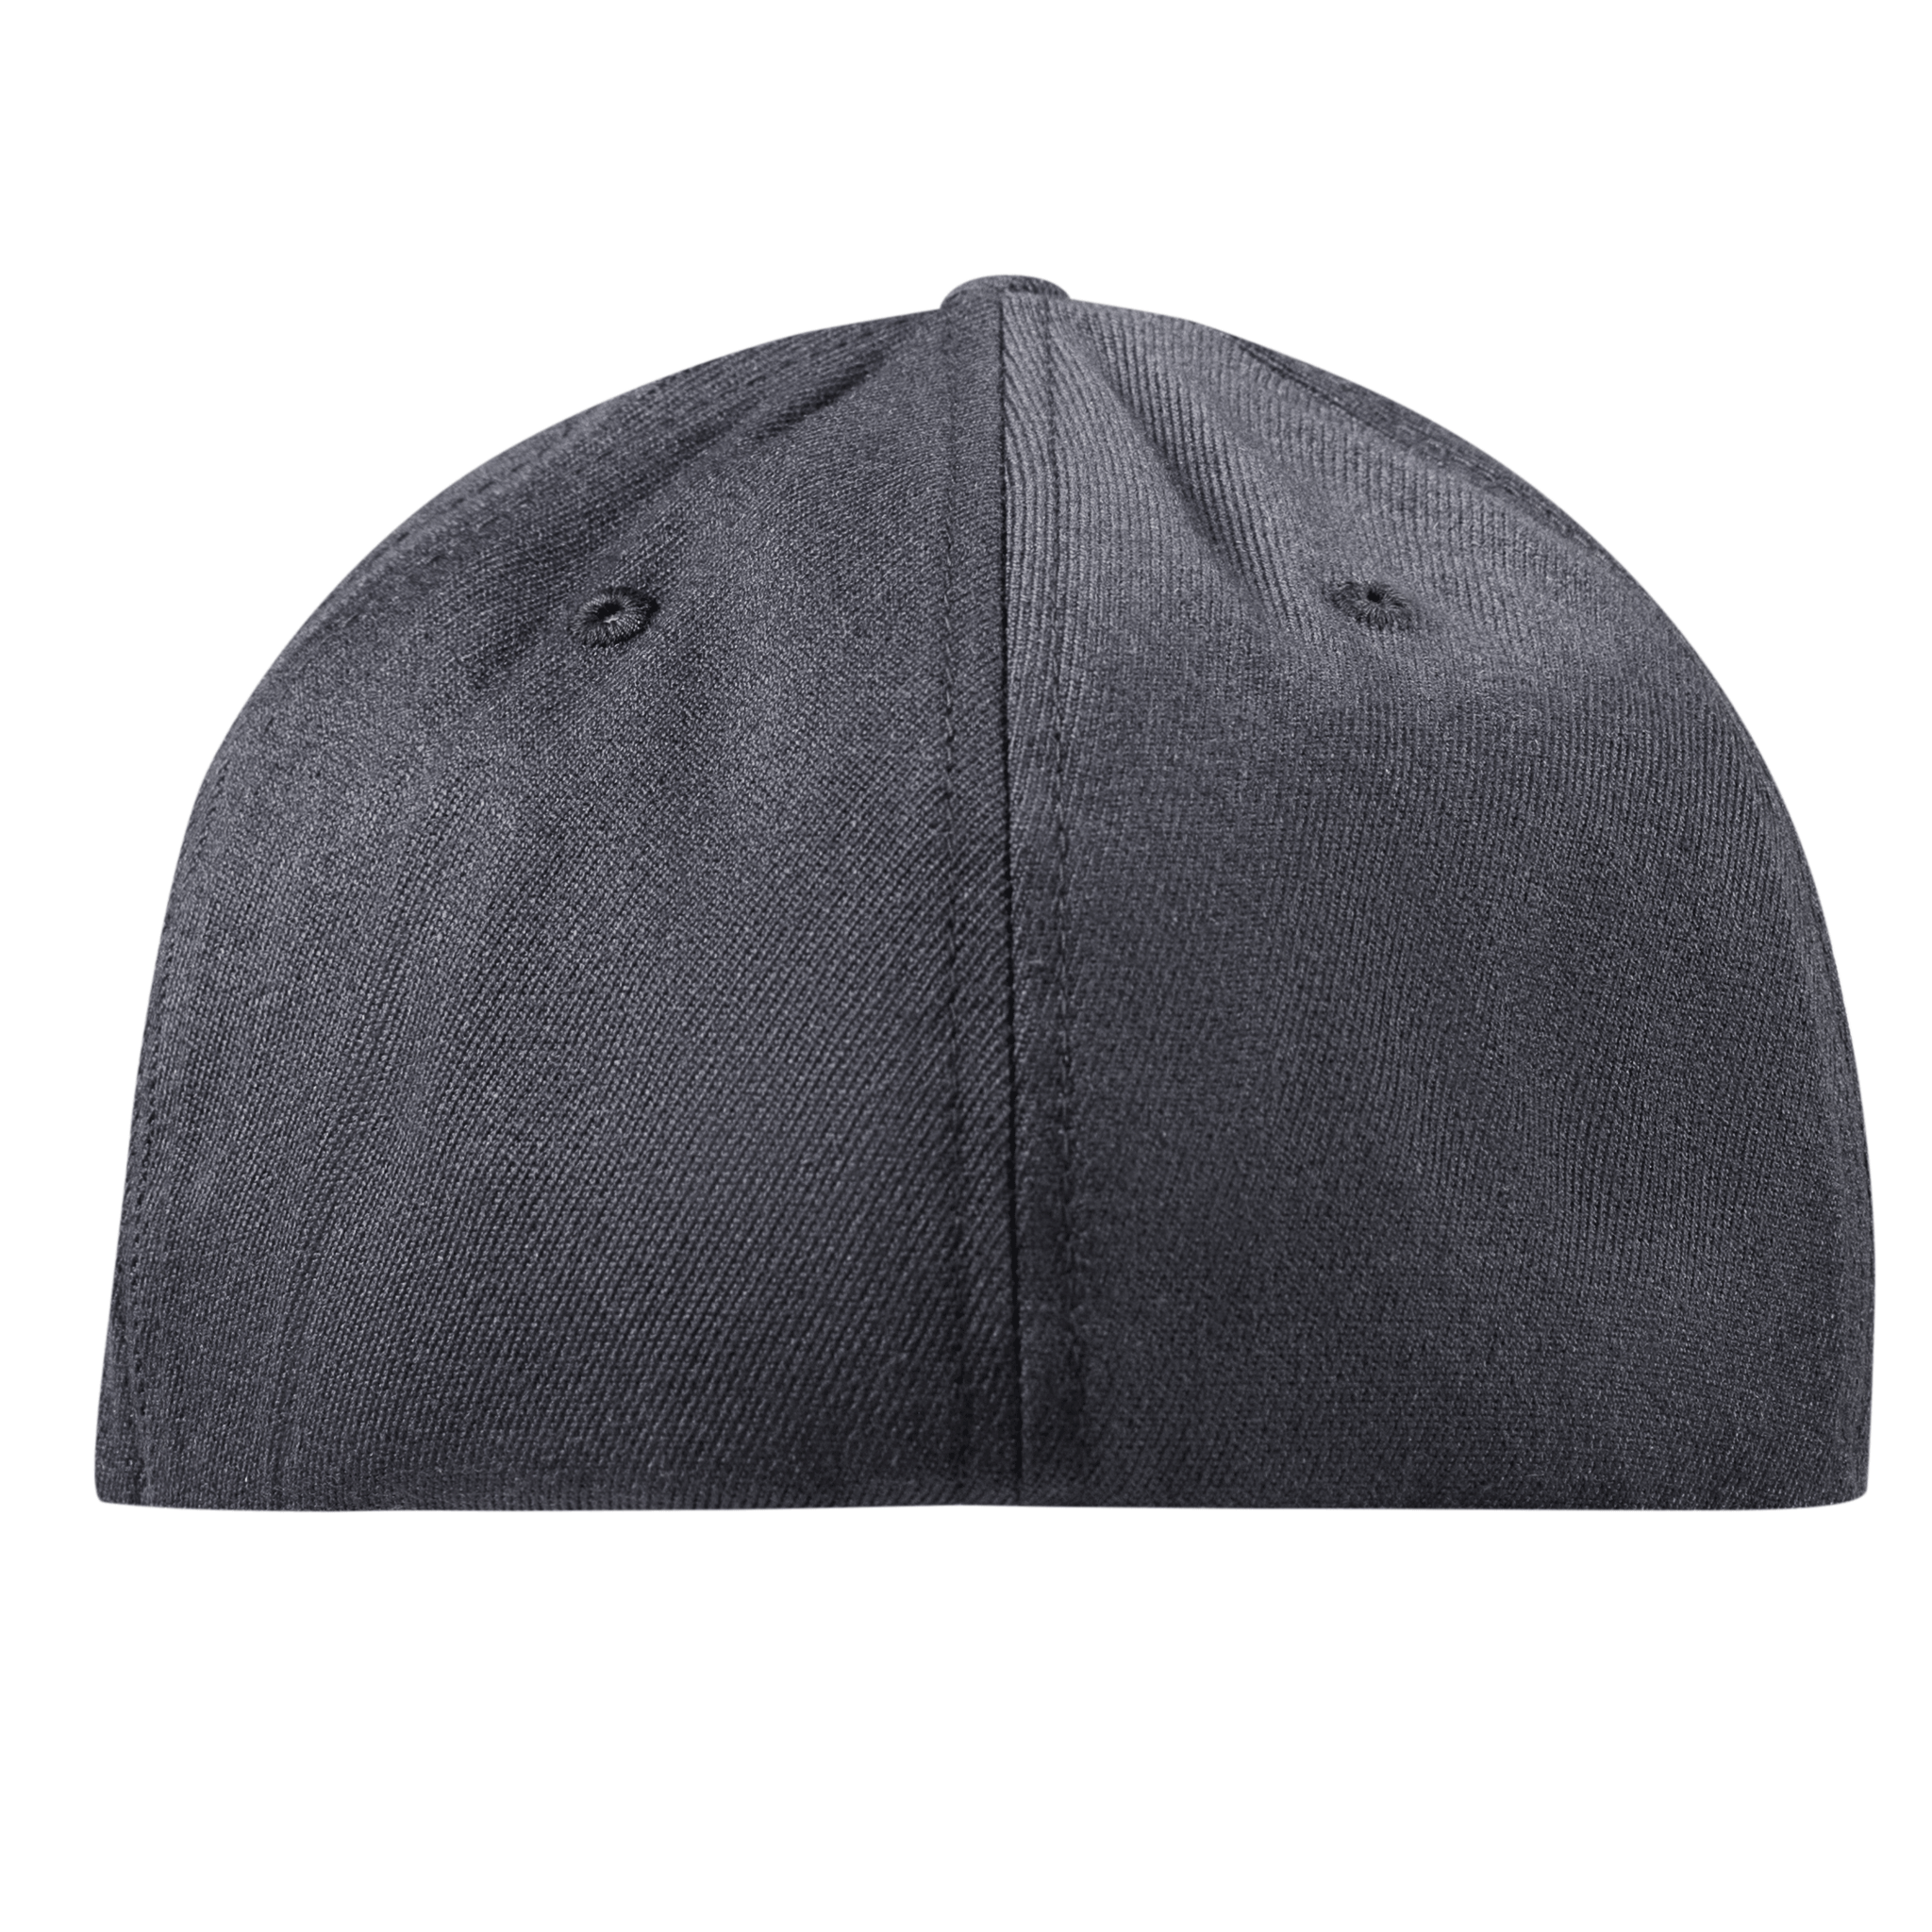 Arkansas Camo Flexfit Fitted Back Charcoal